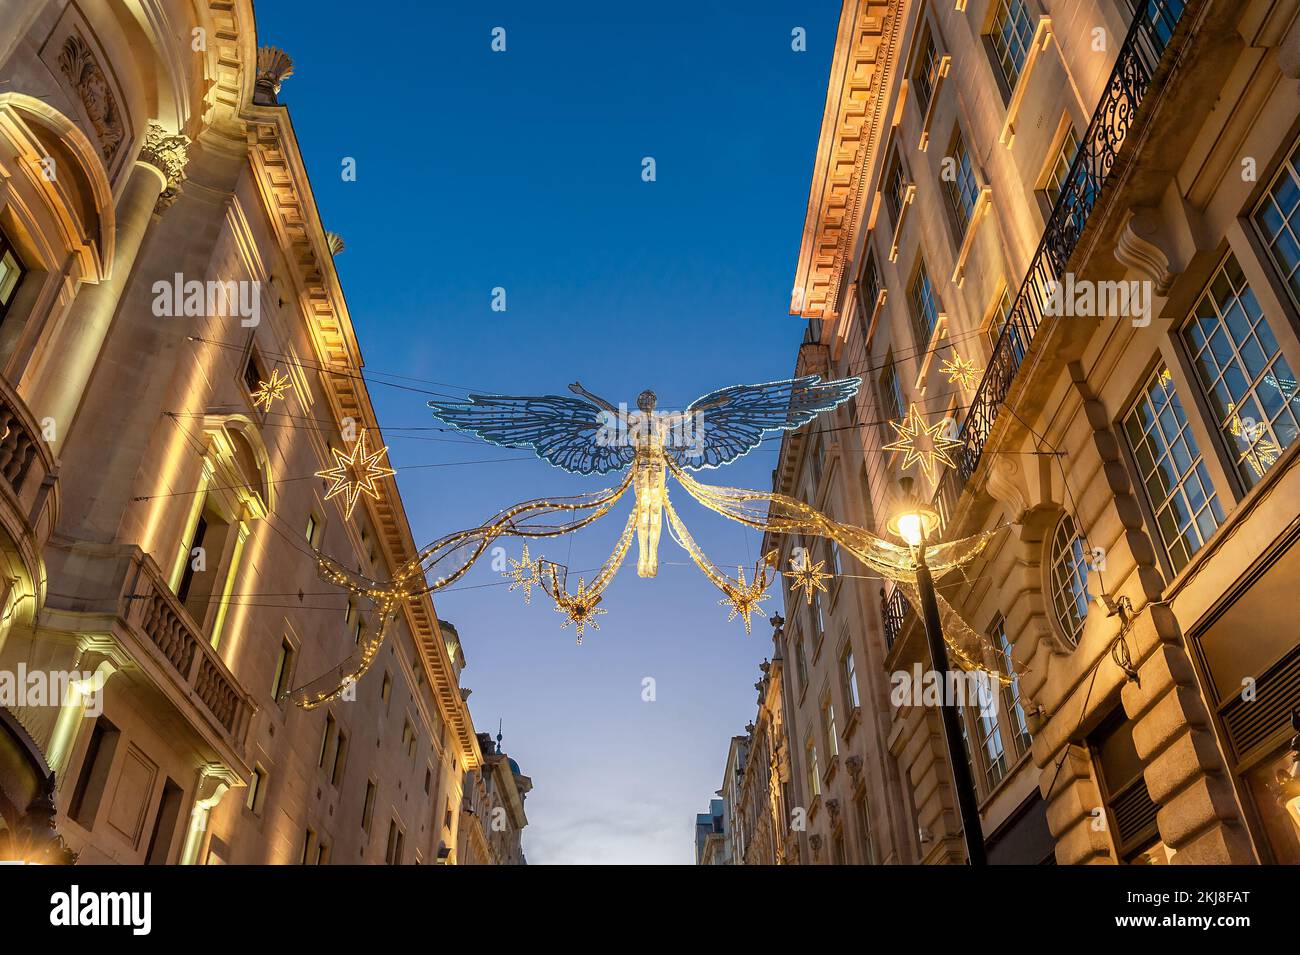 Christmas angels decorations outdoors, on the architecture in the City of London, in England Stock Photo